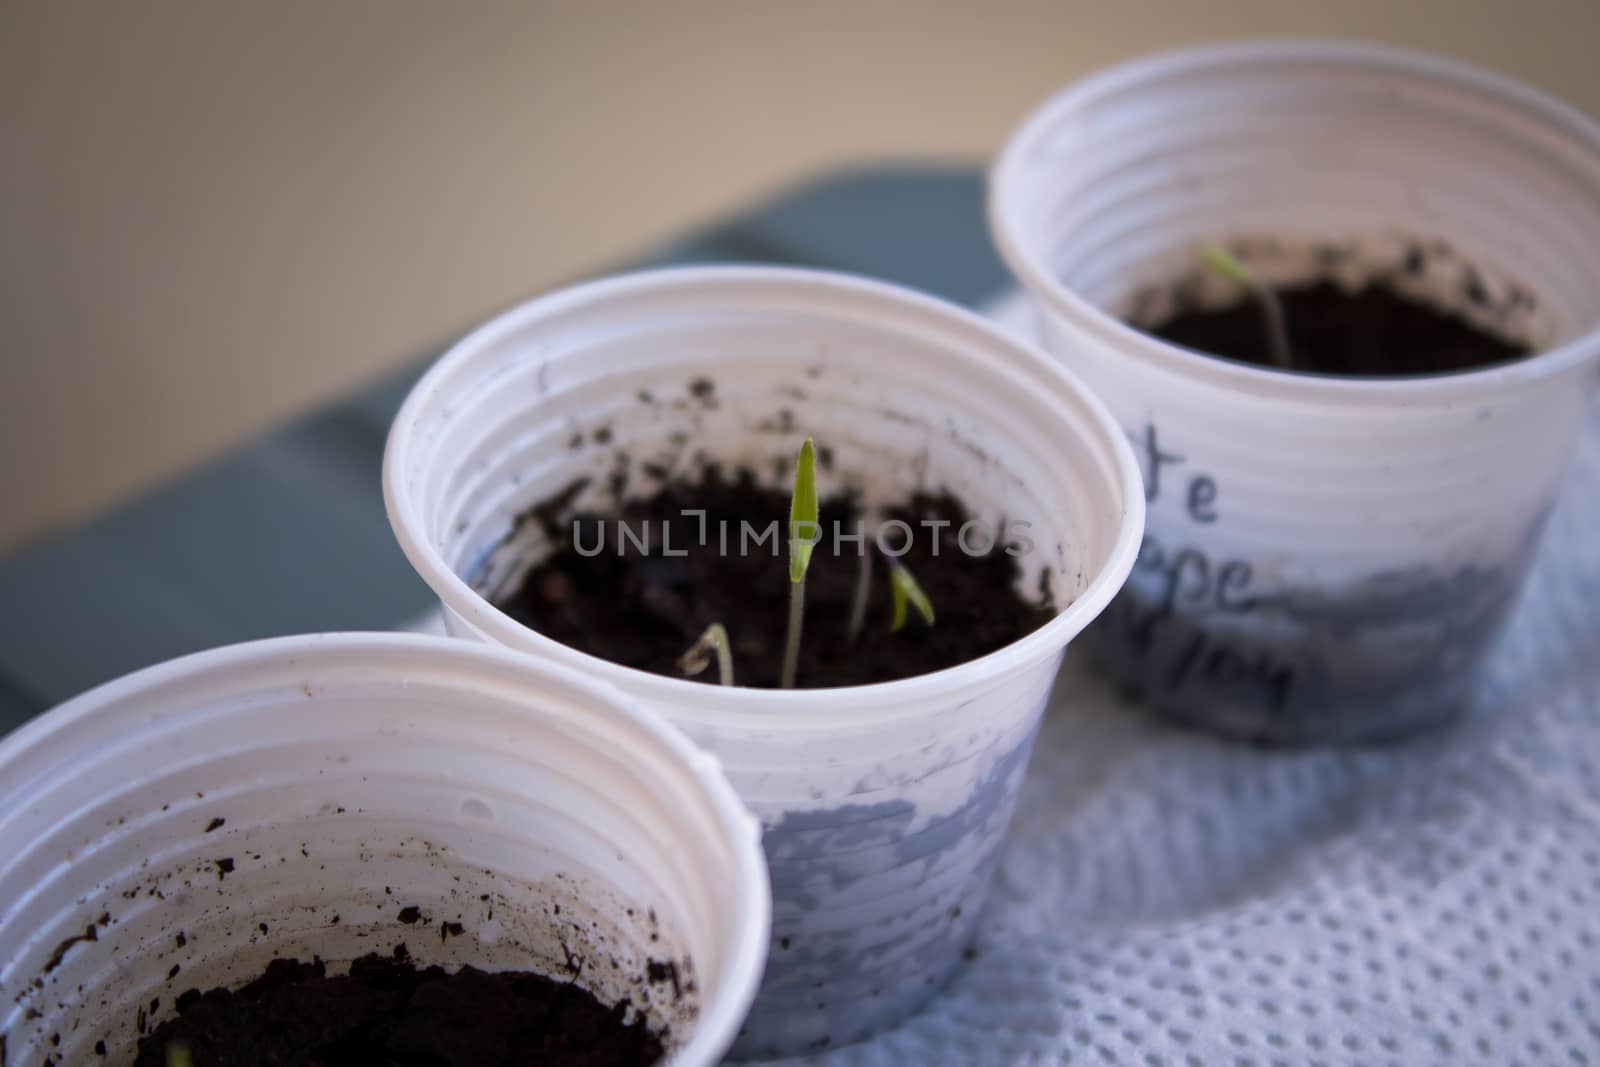 Tomato seedling cultivated at home